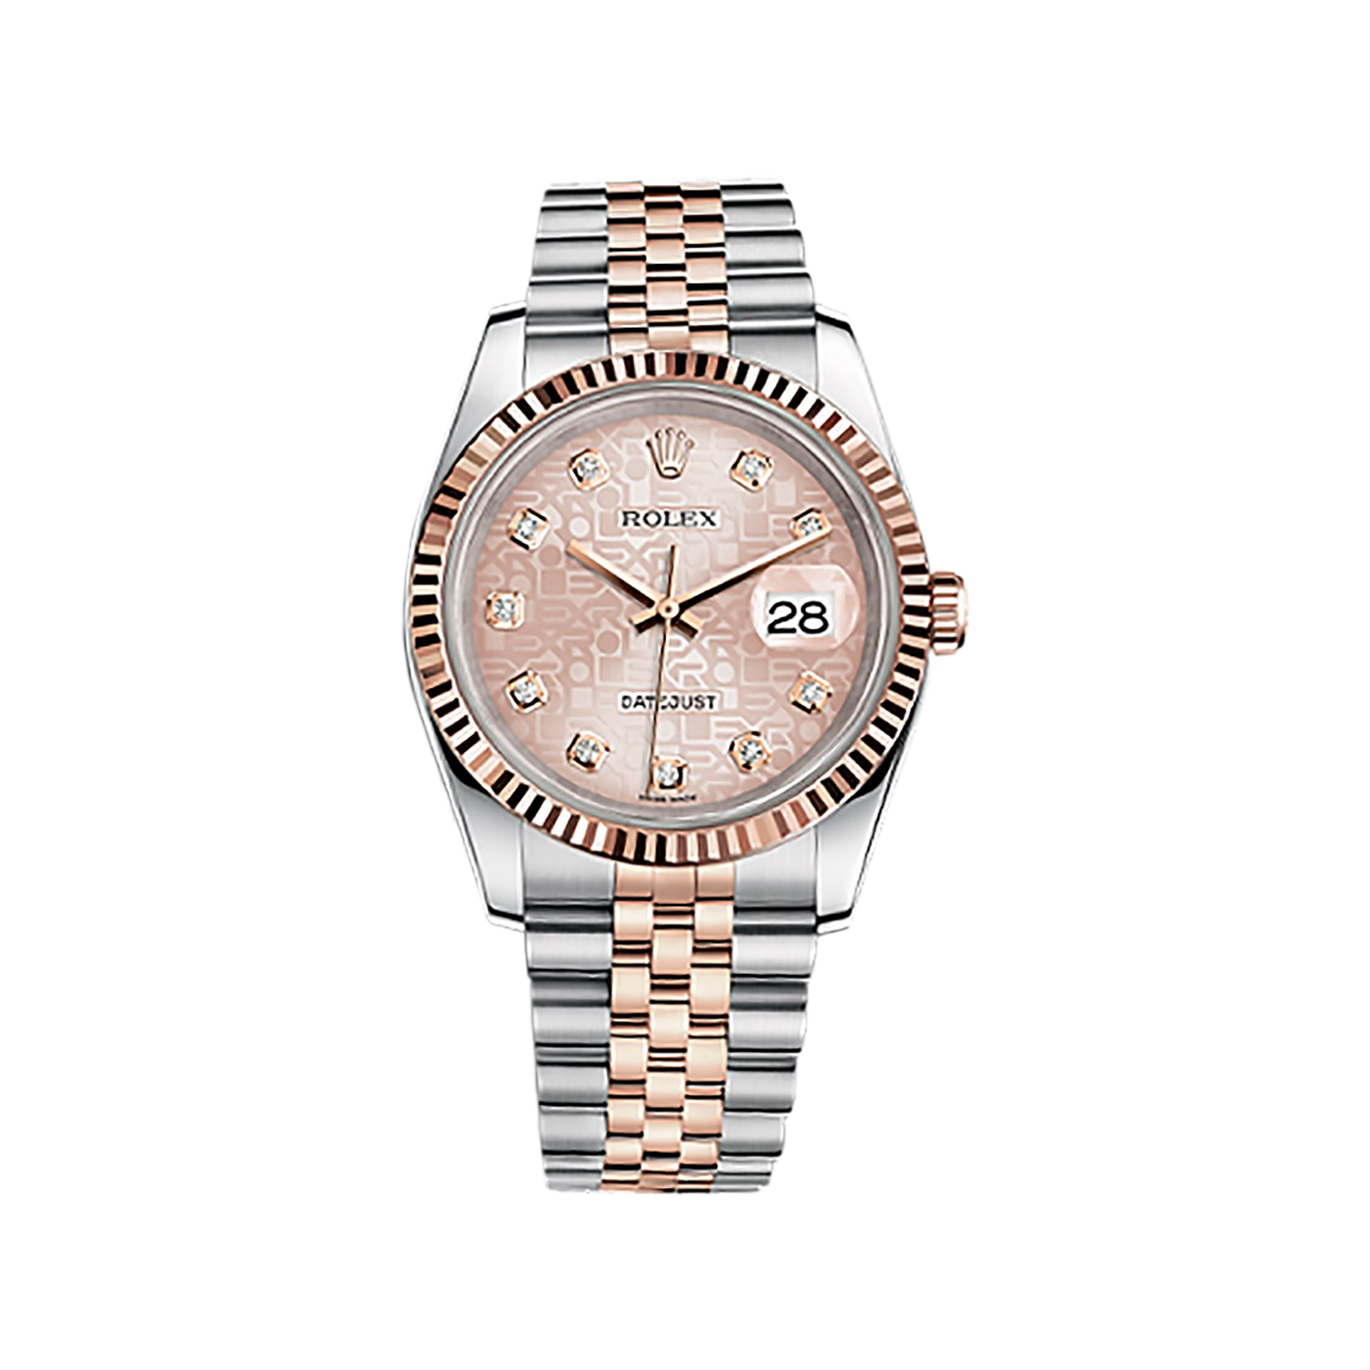 Datejust 36 116231 Rose Gold & Stainless Steel Watch (Pink Jubilee Design Set with Diamonds)